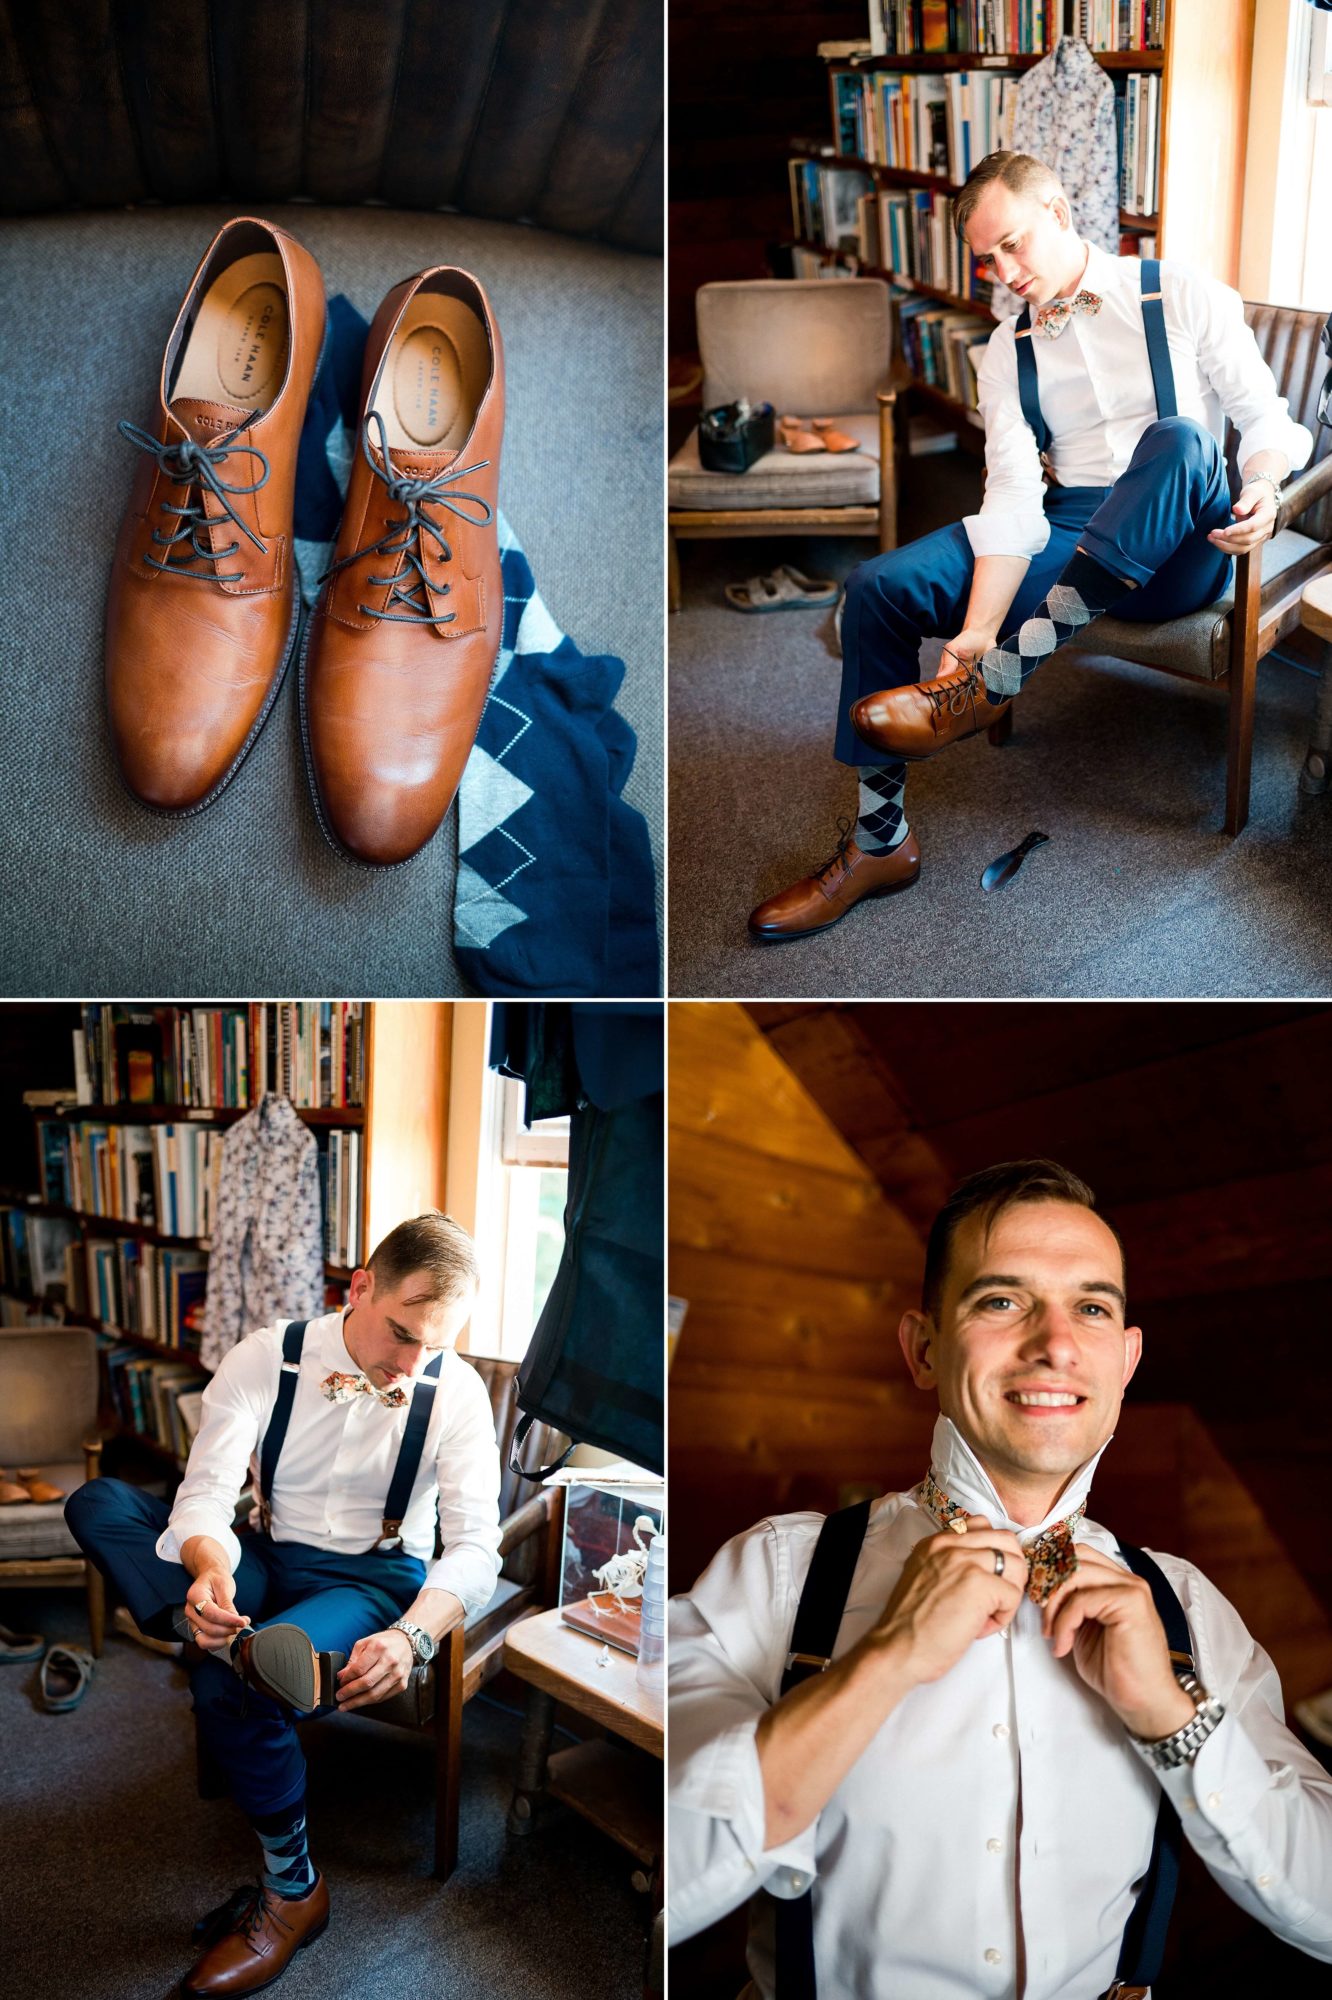 Groom getting ready by putting on shoes and tie